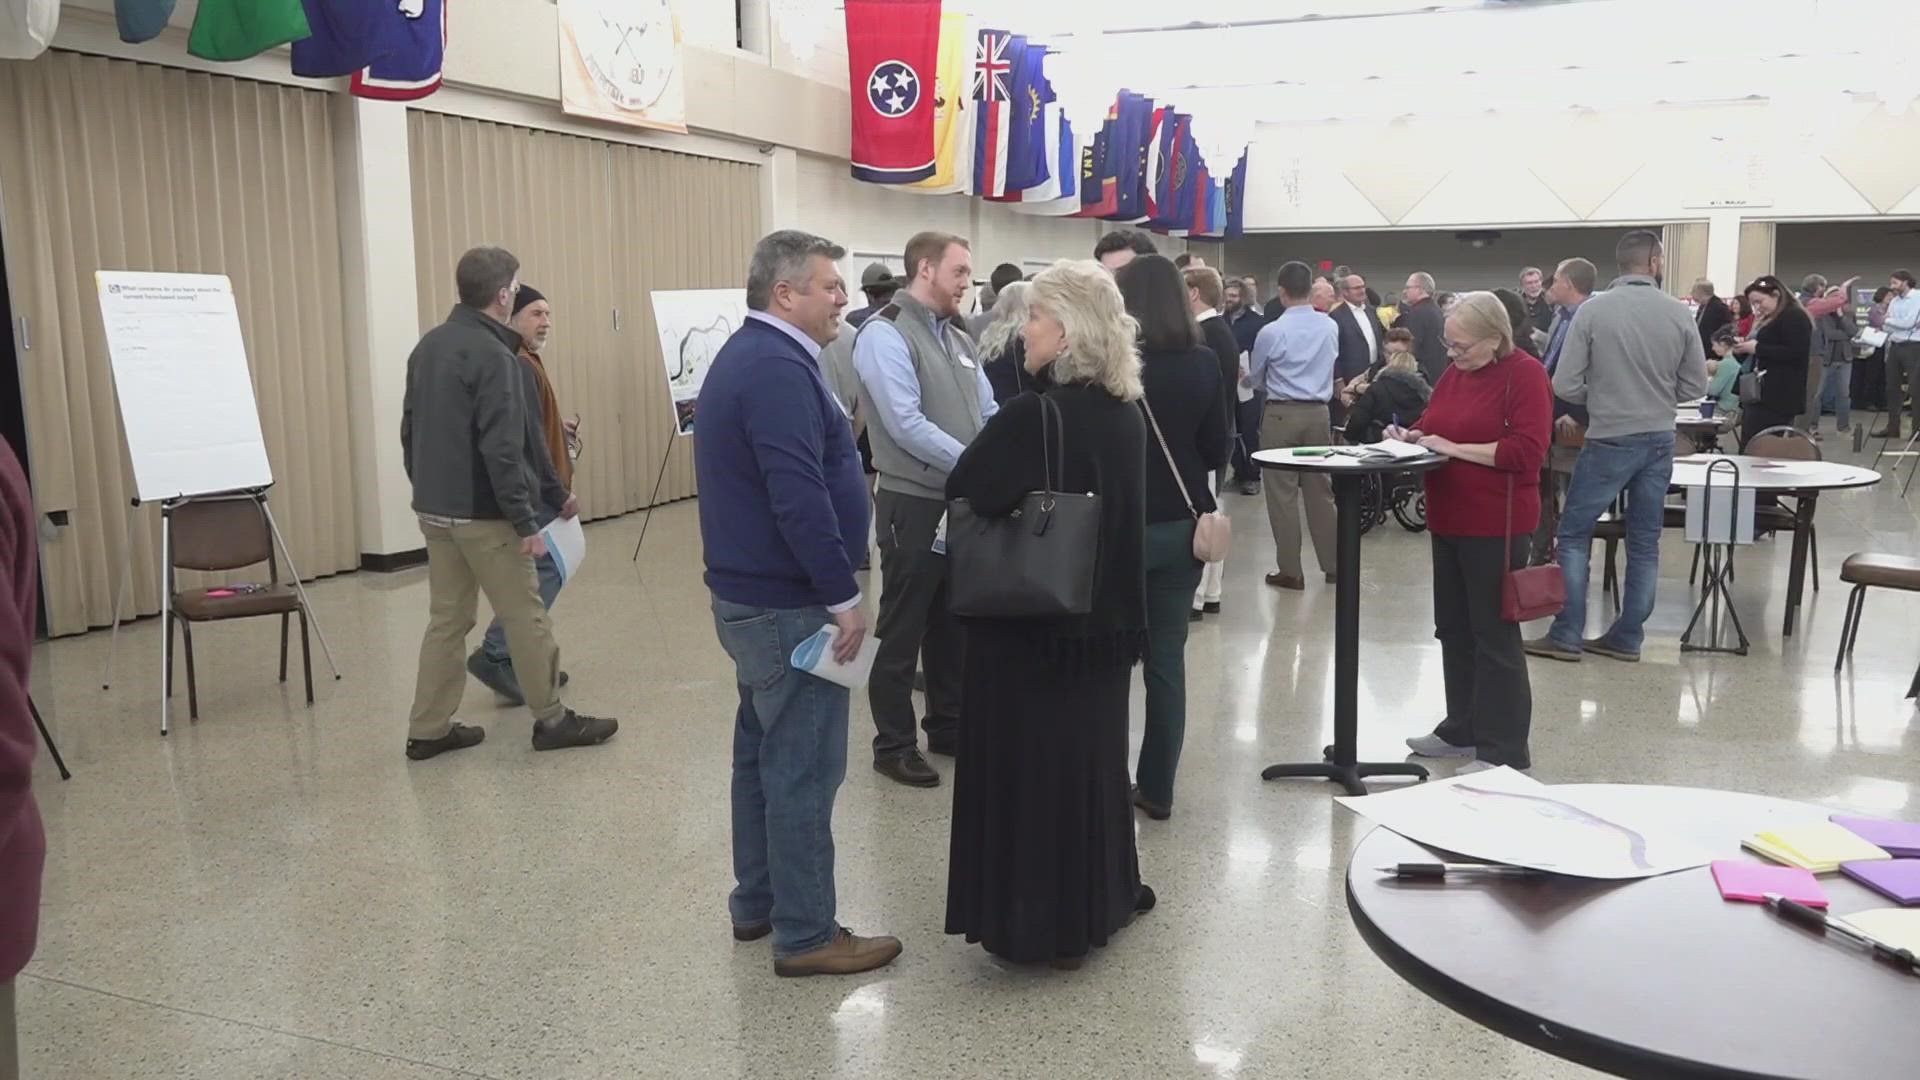 People had a chance to learn more about a proposed bridge across the Tennessee River, the Urban Wilderness Gateway Park and Sevier Ave. Streetscape projects.